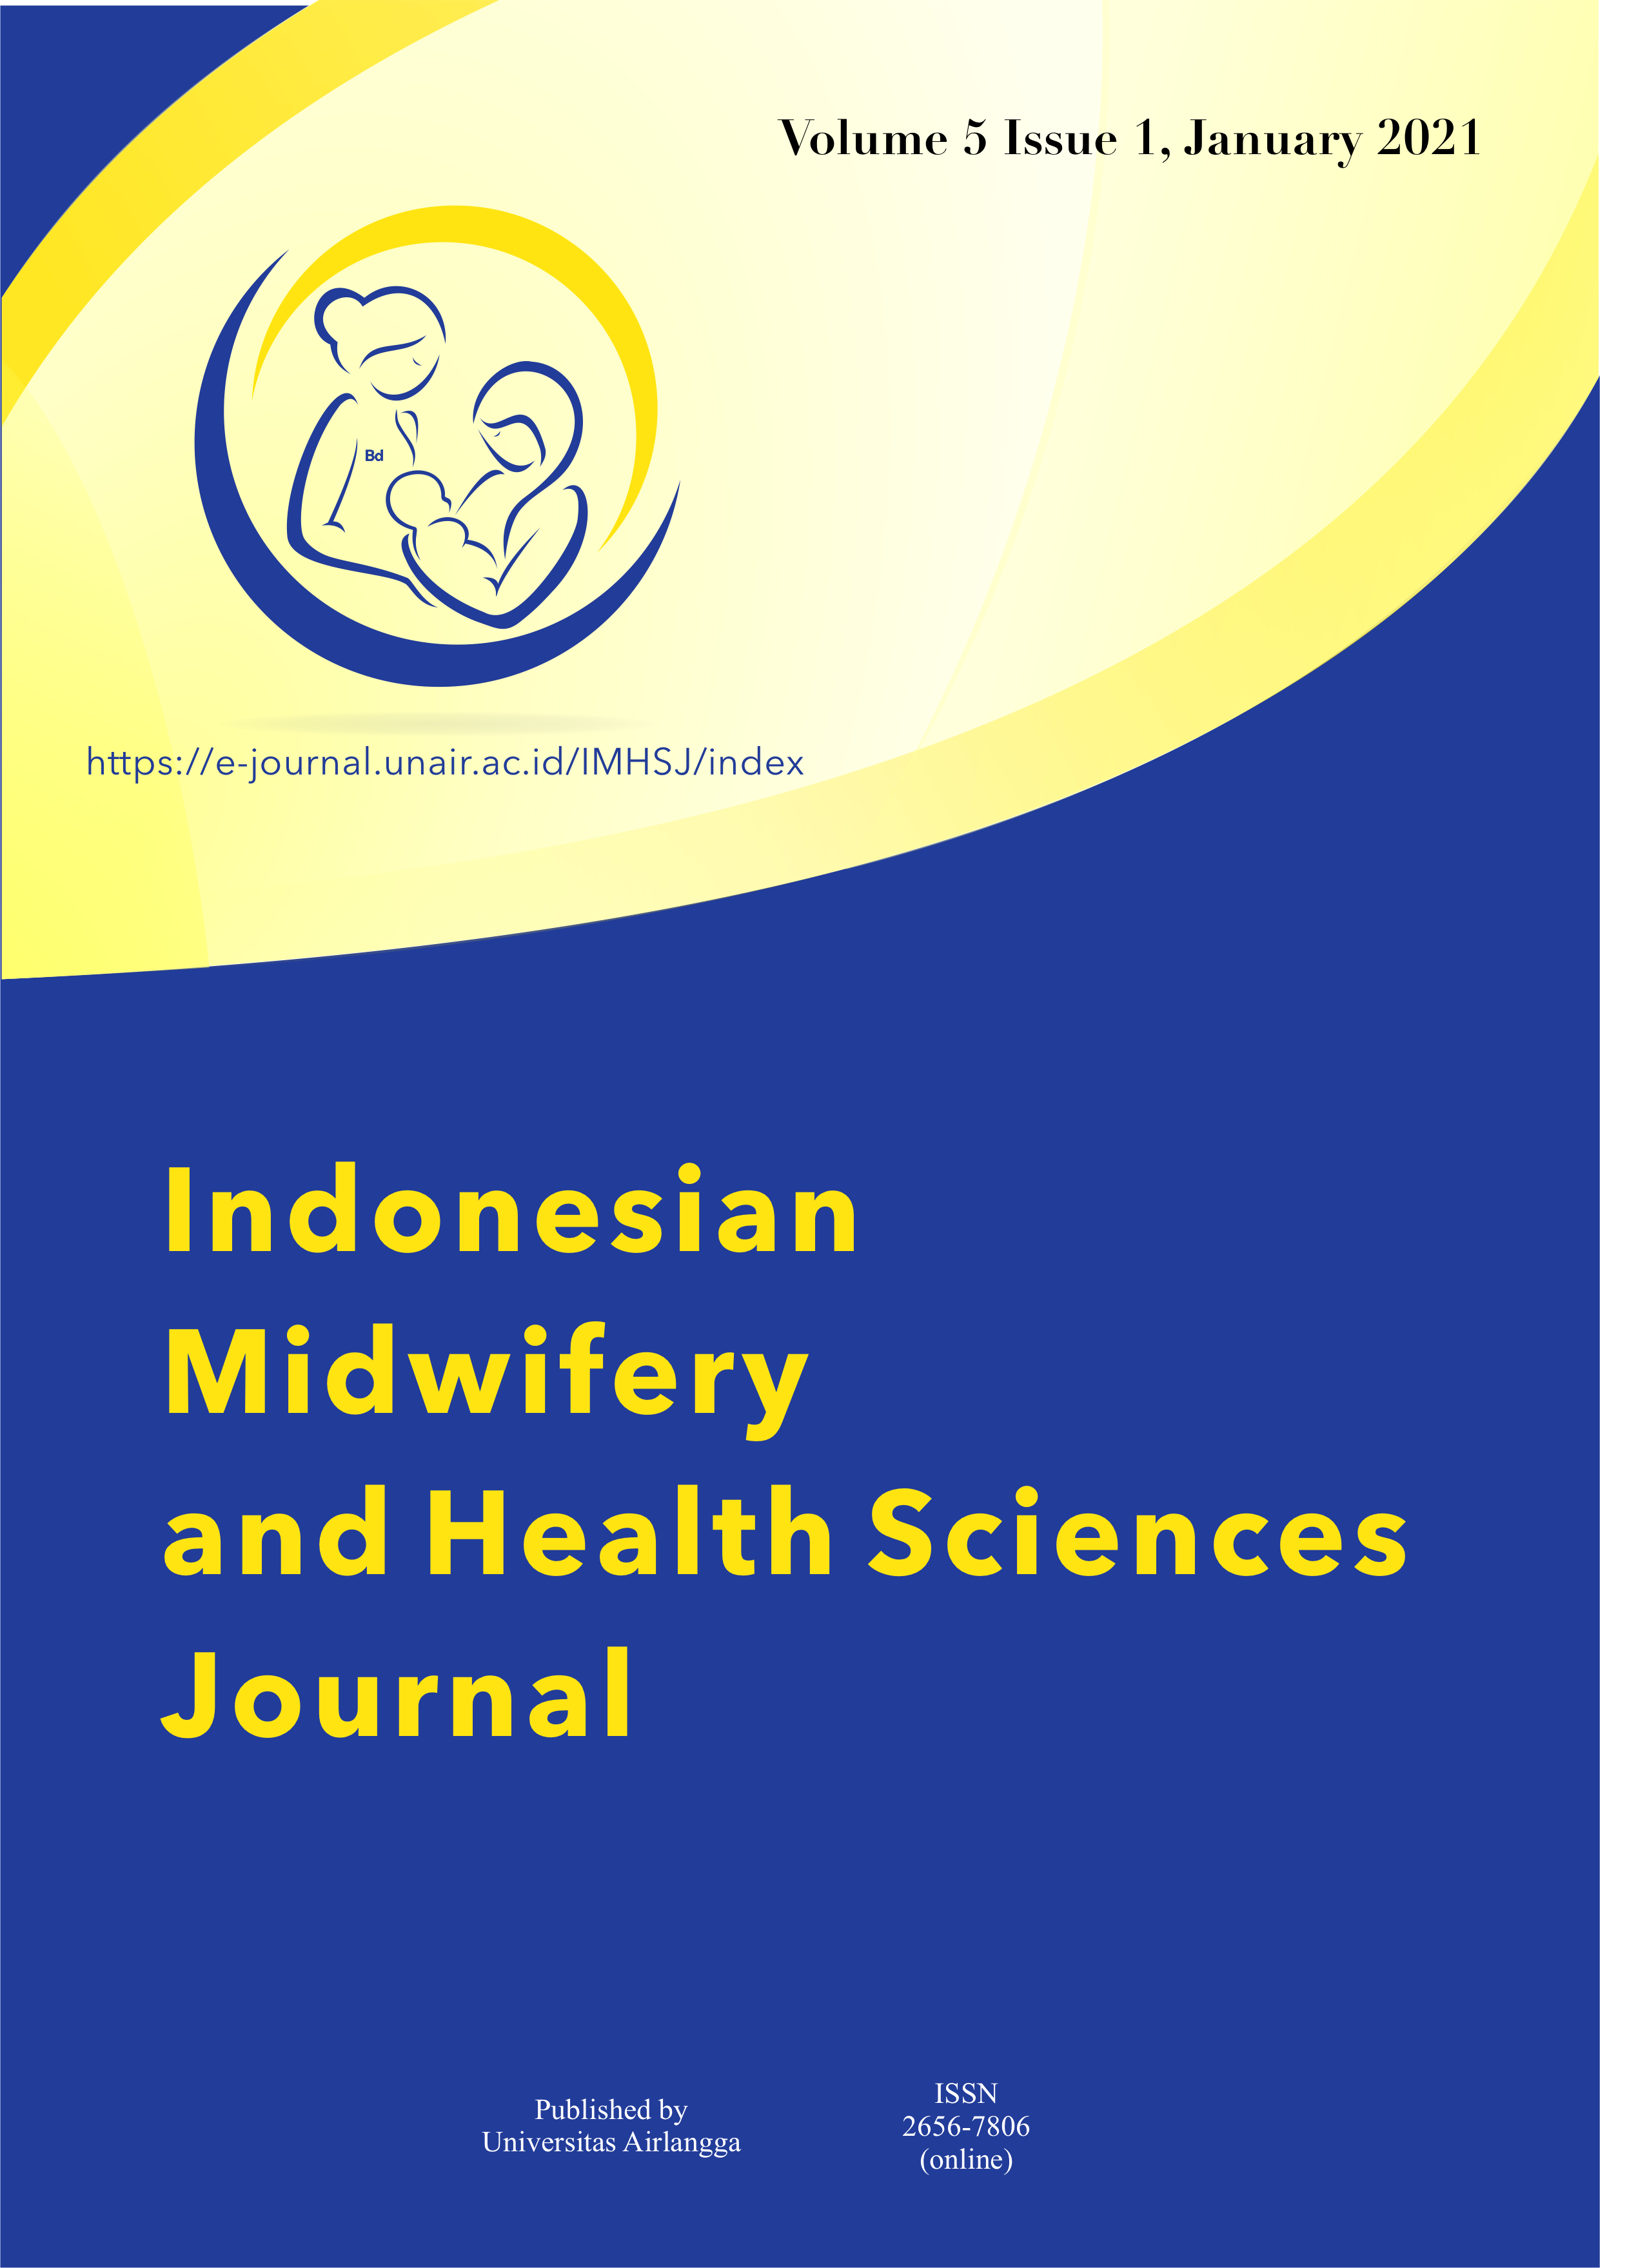 						View Vol. 5 No. 1 (2021): Indonesian Midwifery and Health Sciences Journal, January 2021
					